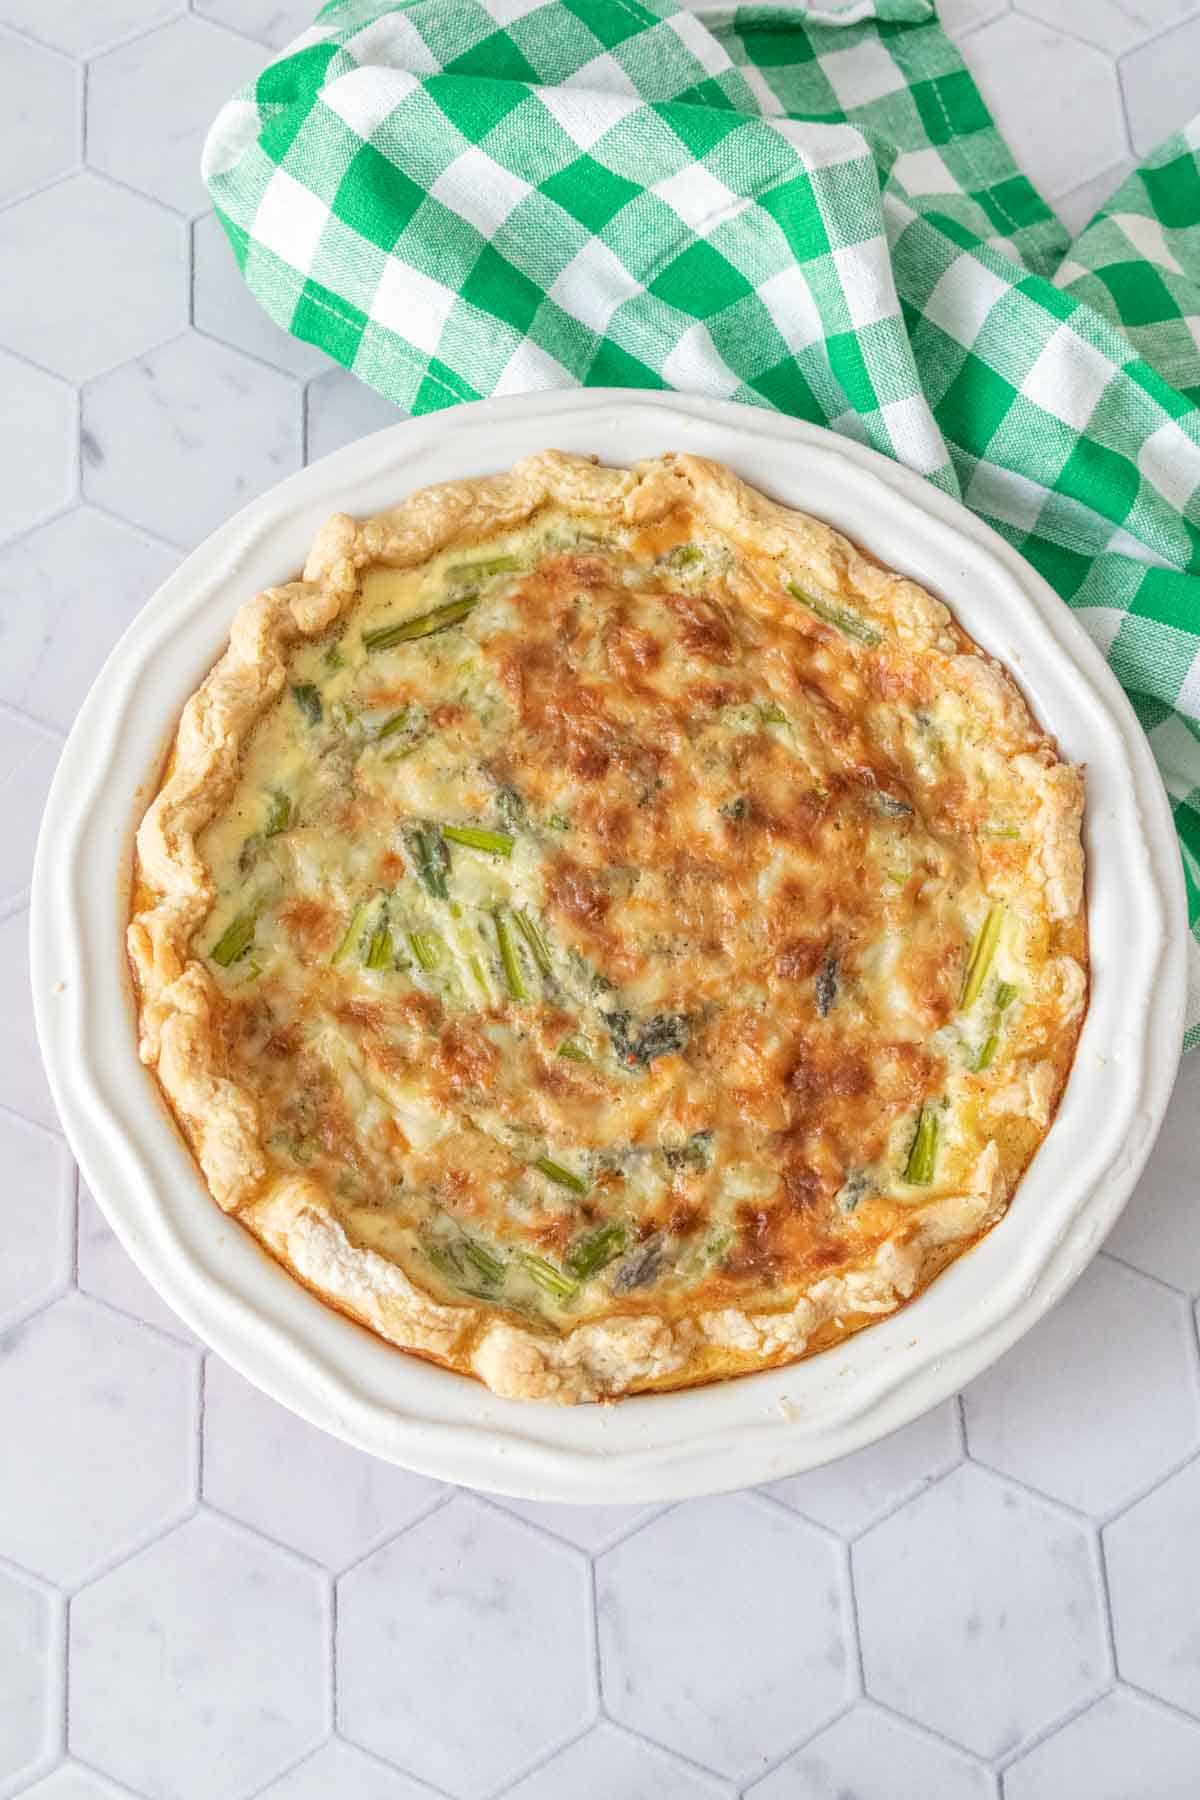 Baked asparagus quiche with a green patterned napkin beside.